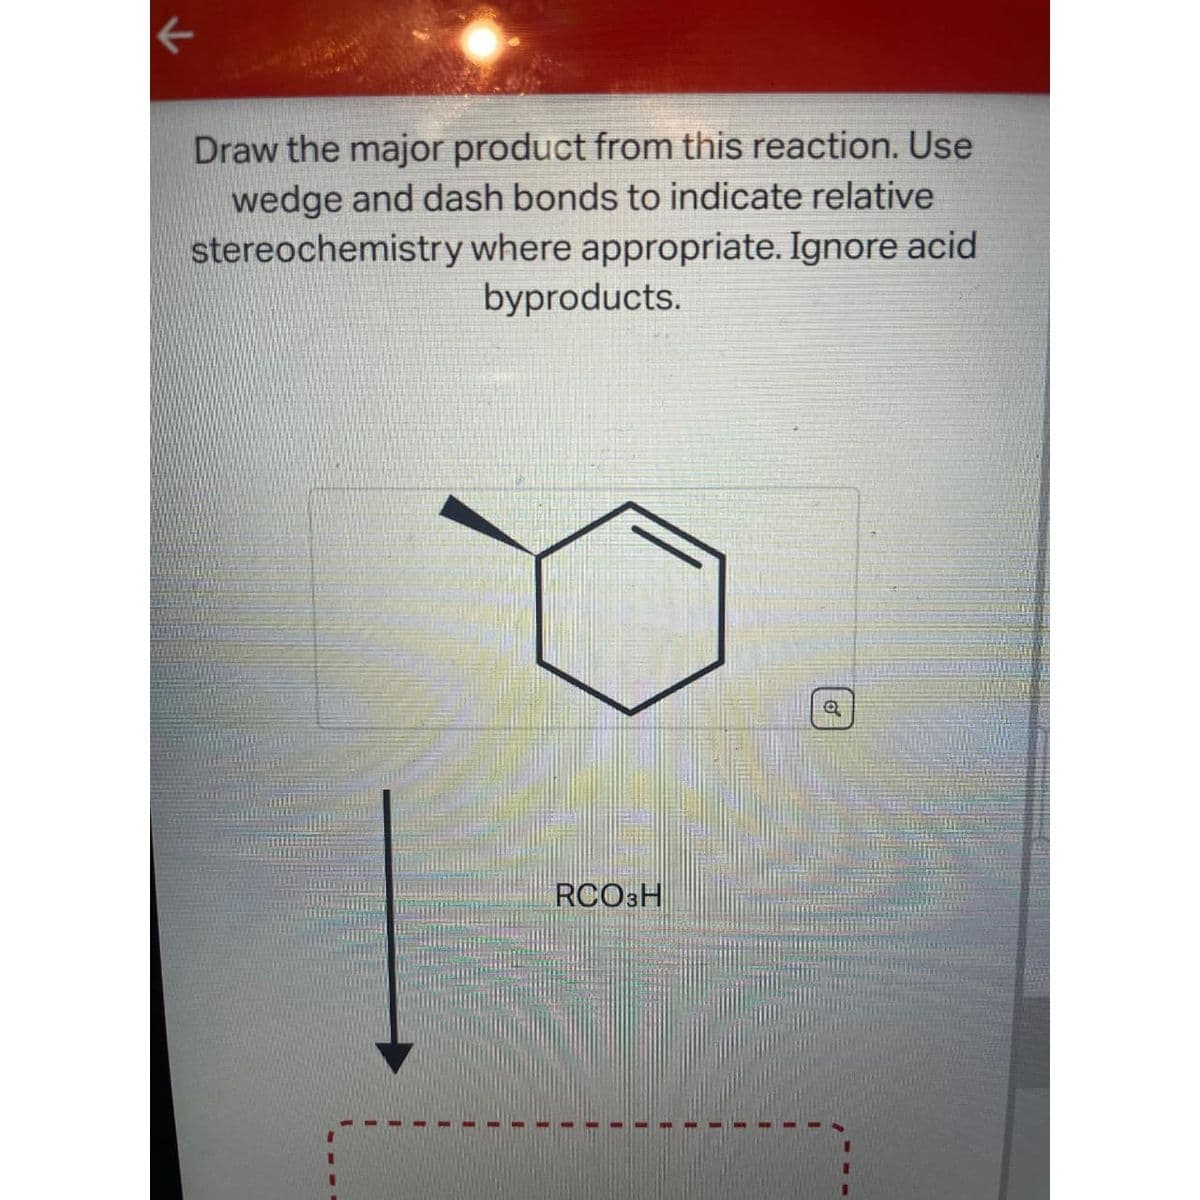 K
Draw the major product from this reaction. Use
wedge and dash bonds to indicate relative
stereochemistry where appropriate. Ignore acid
byproducts.
E
1
E
RCO3H
I
LE
1
L
#
Q